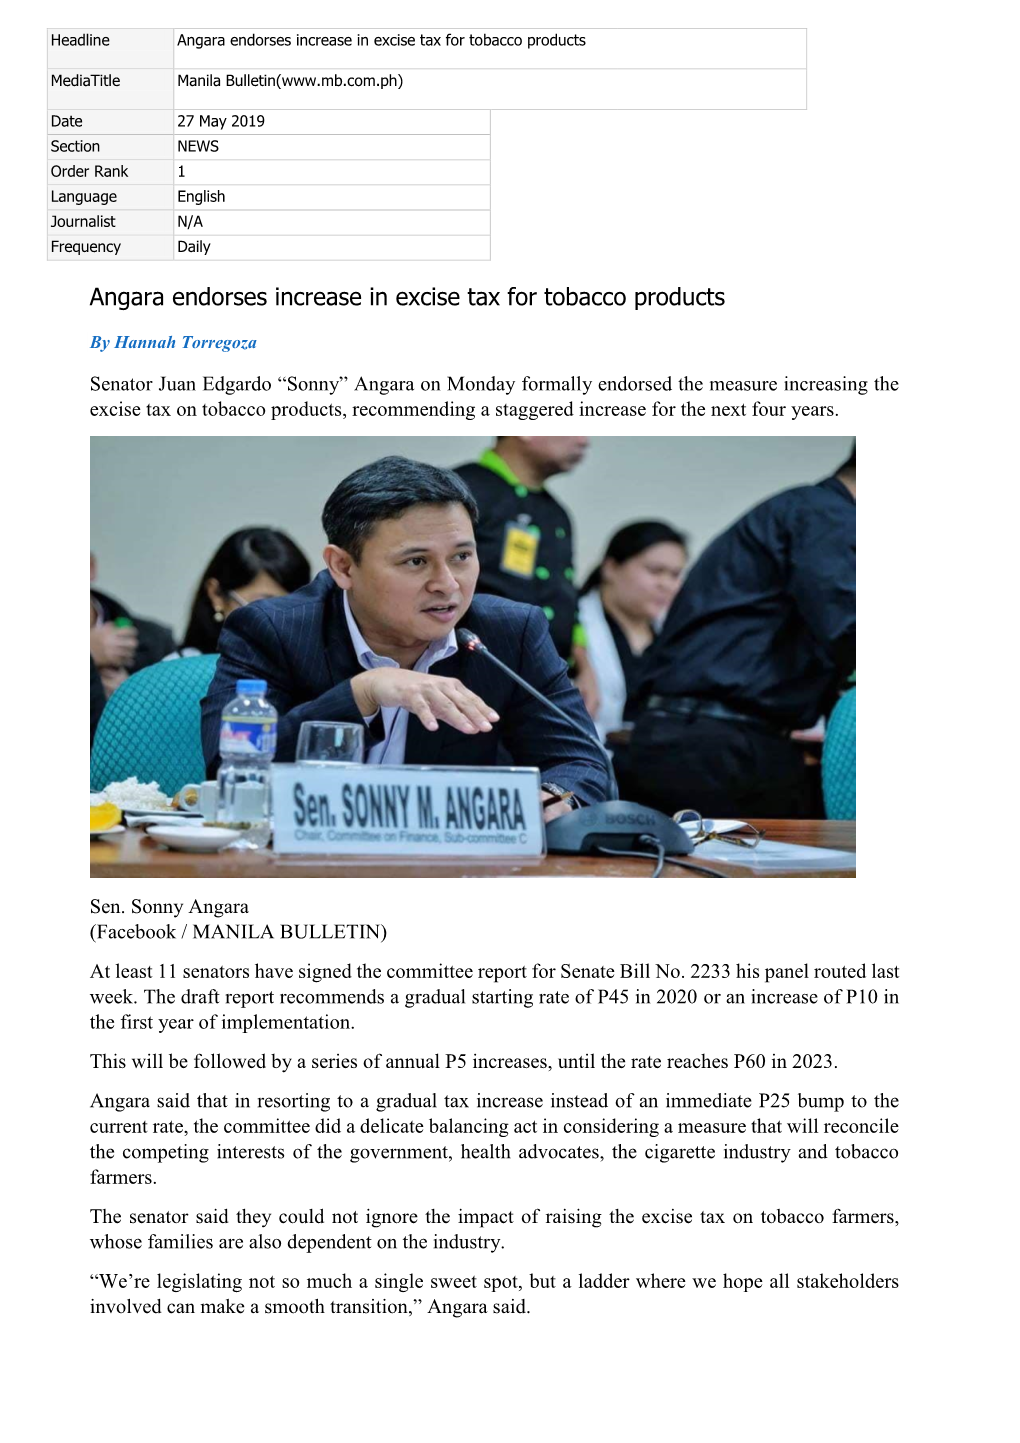 Angara Endorses Increase in Excise Tax for Tobacco Products